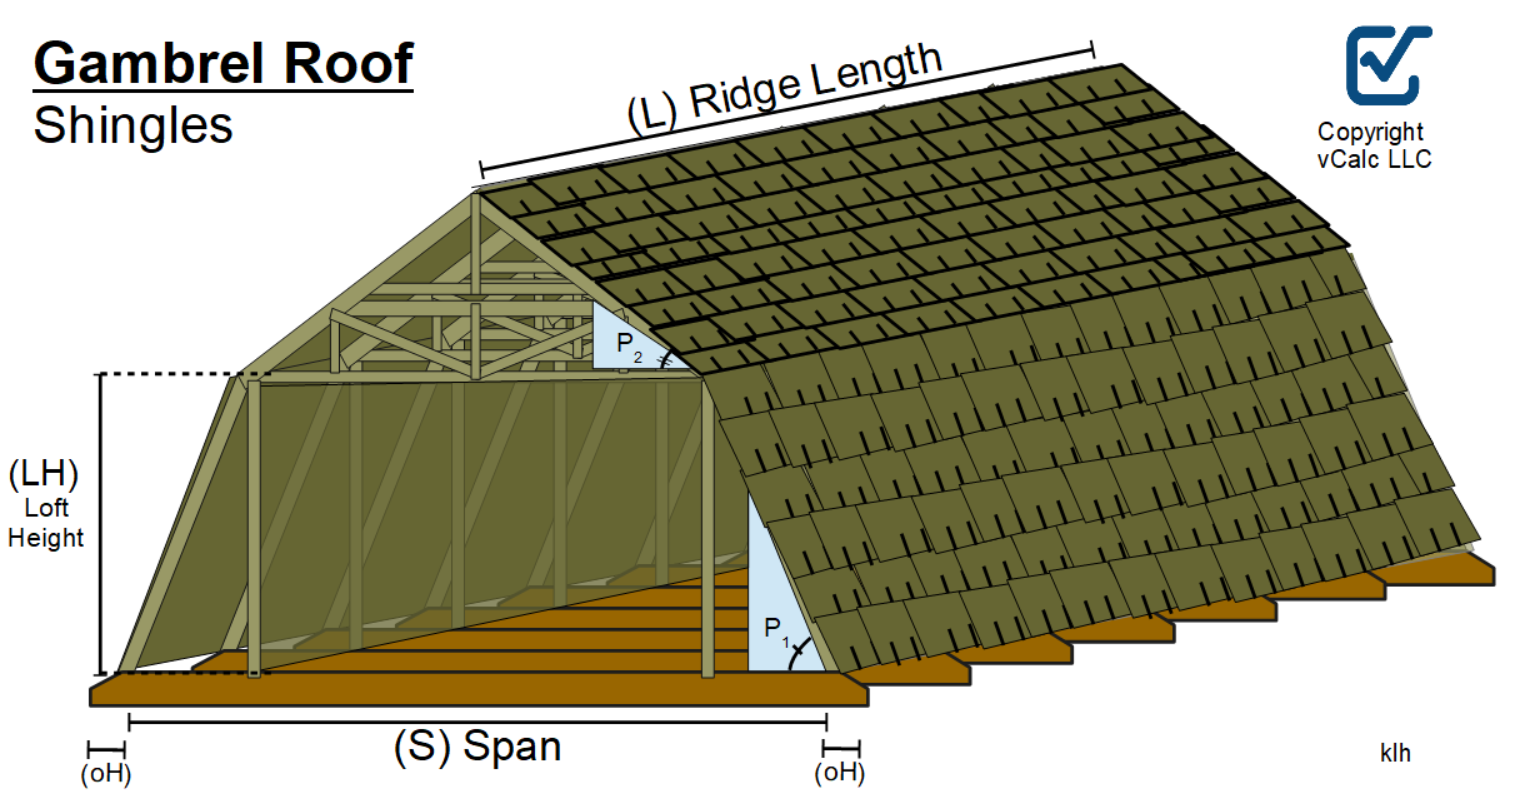 Roofing Nails for a Shingled Gambrel Roof